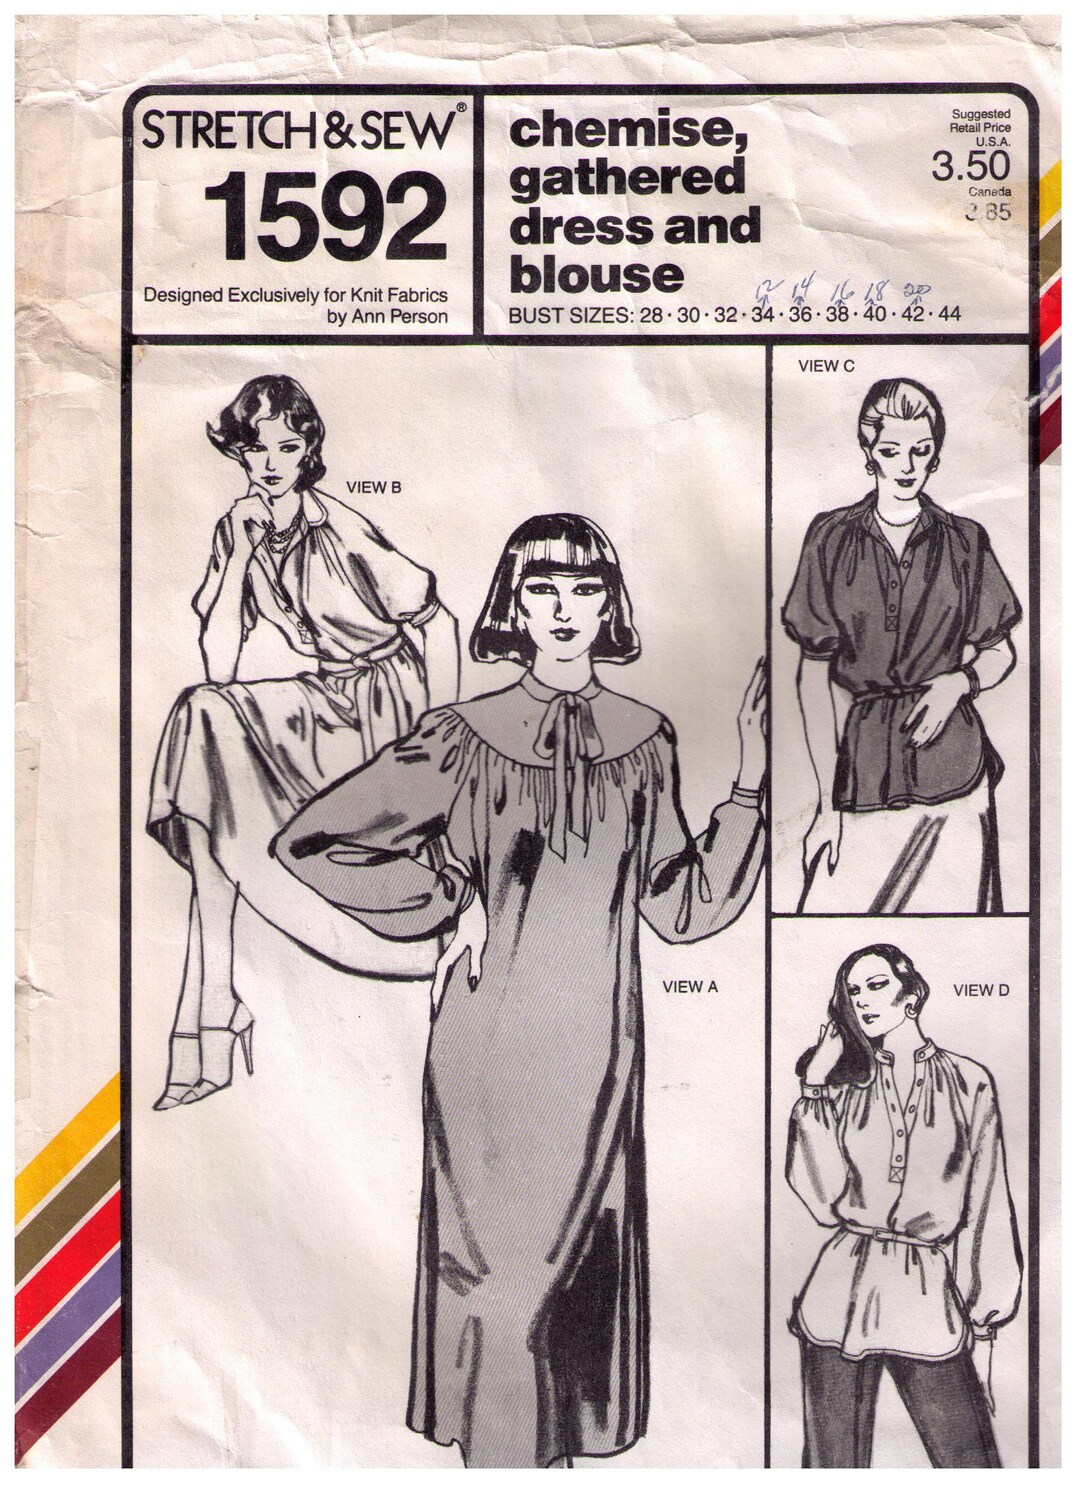 Stretch Sew 1592 70s Sewing Pattern Bust 2844 - Etsy